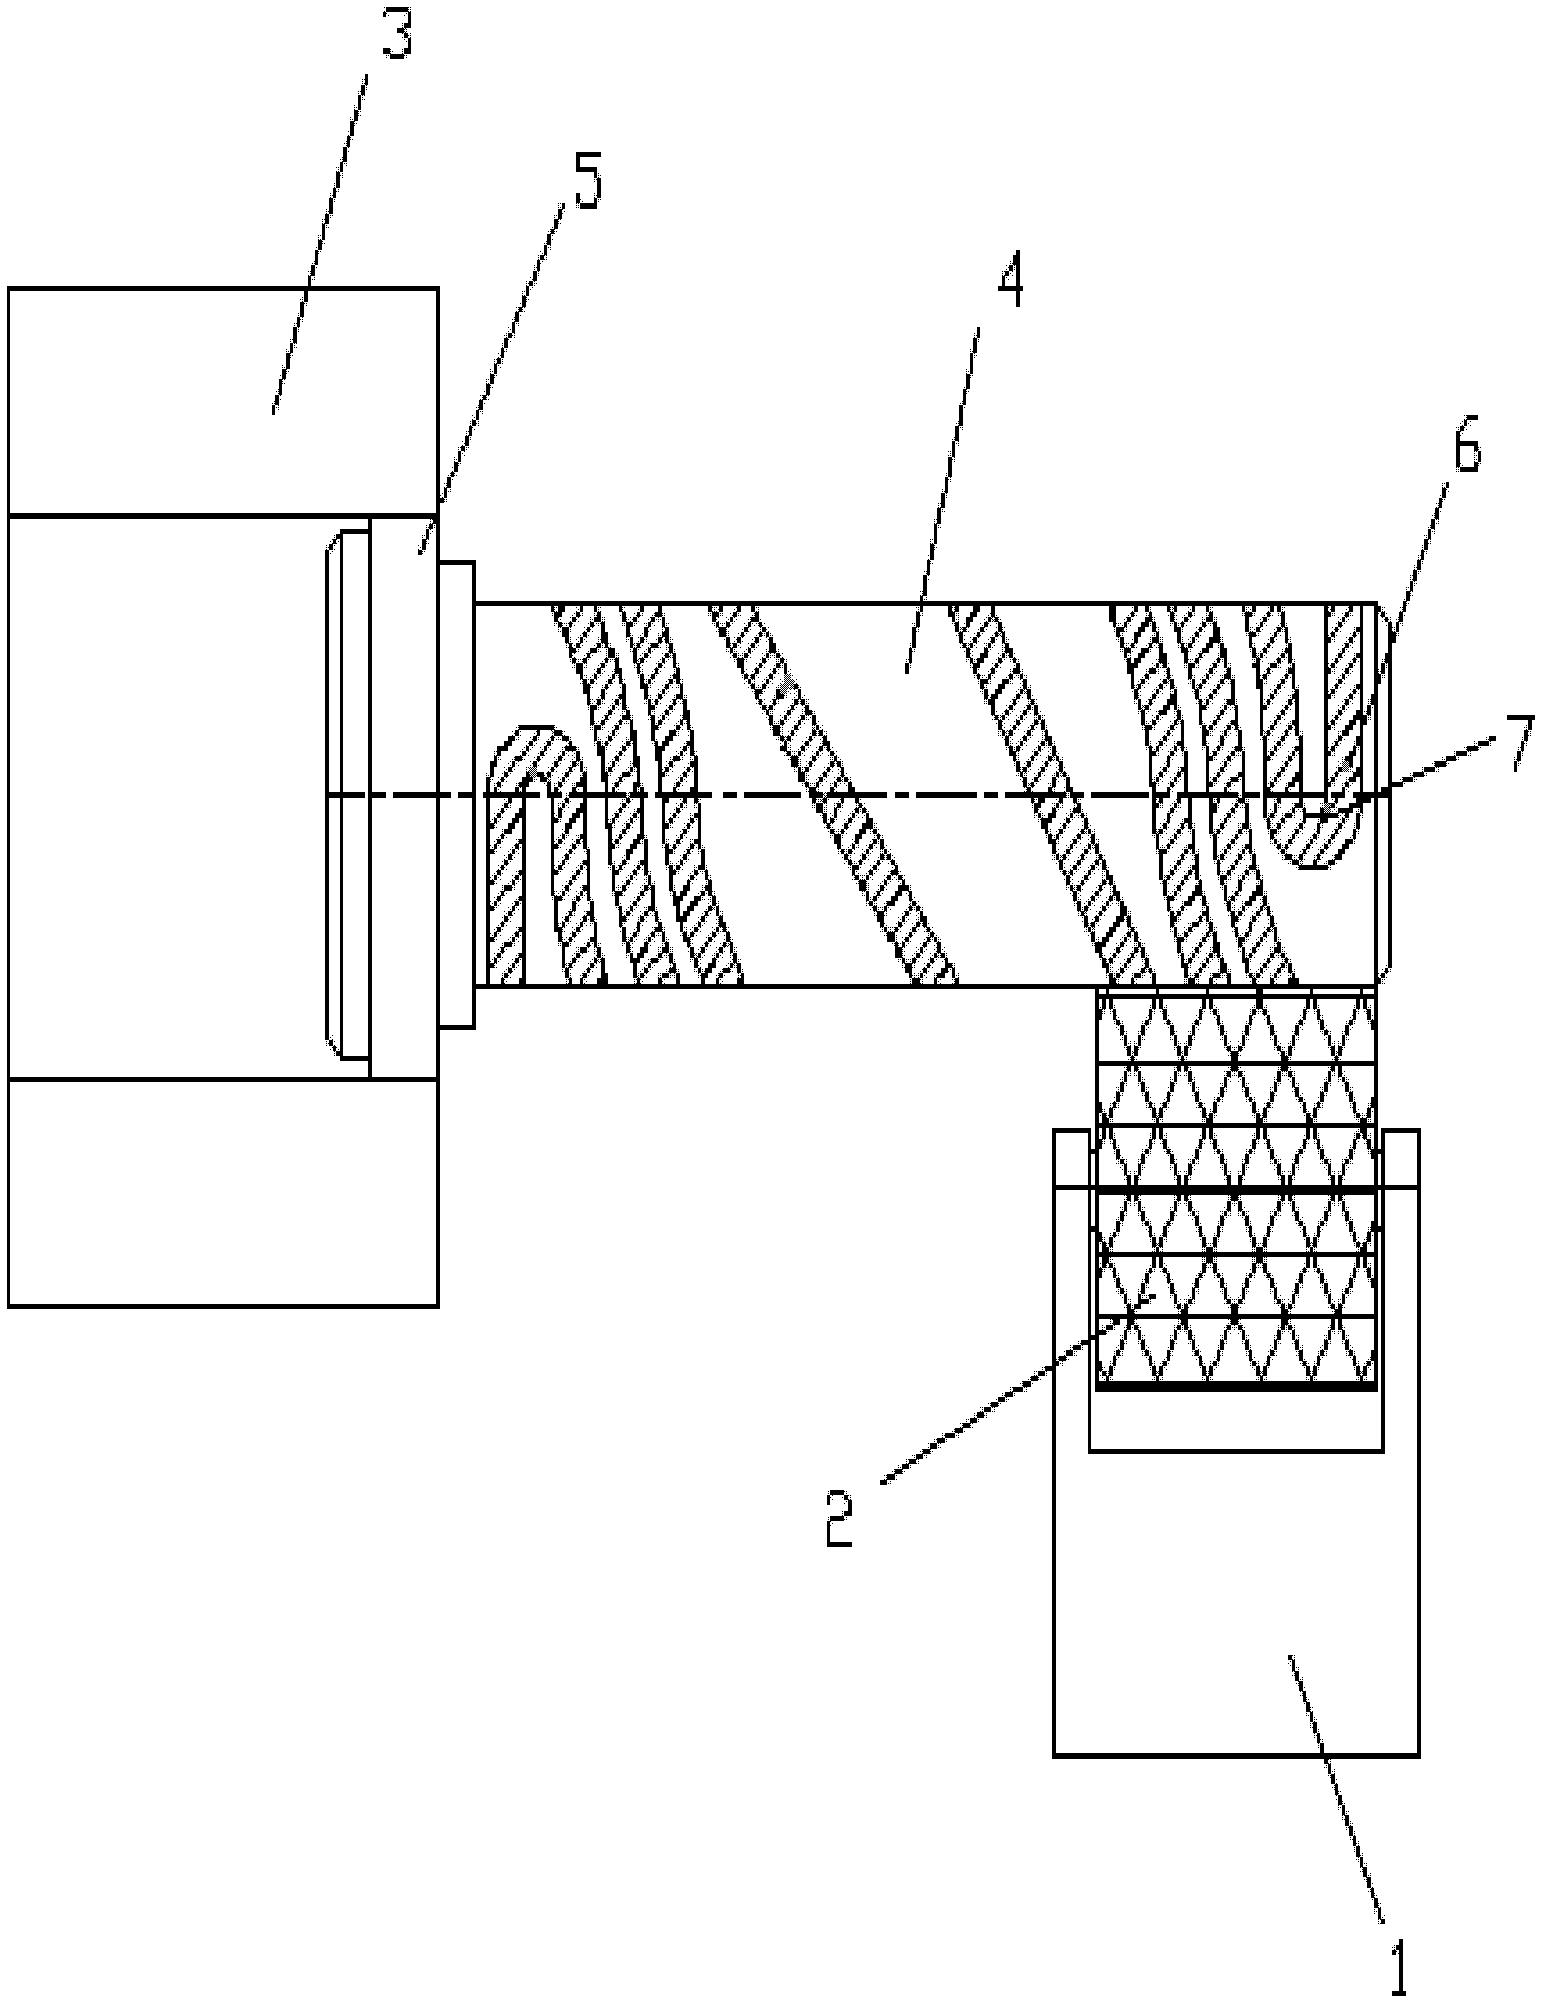 Line pressing device for hot runner nozzle heater